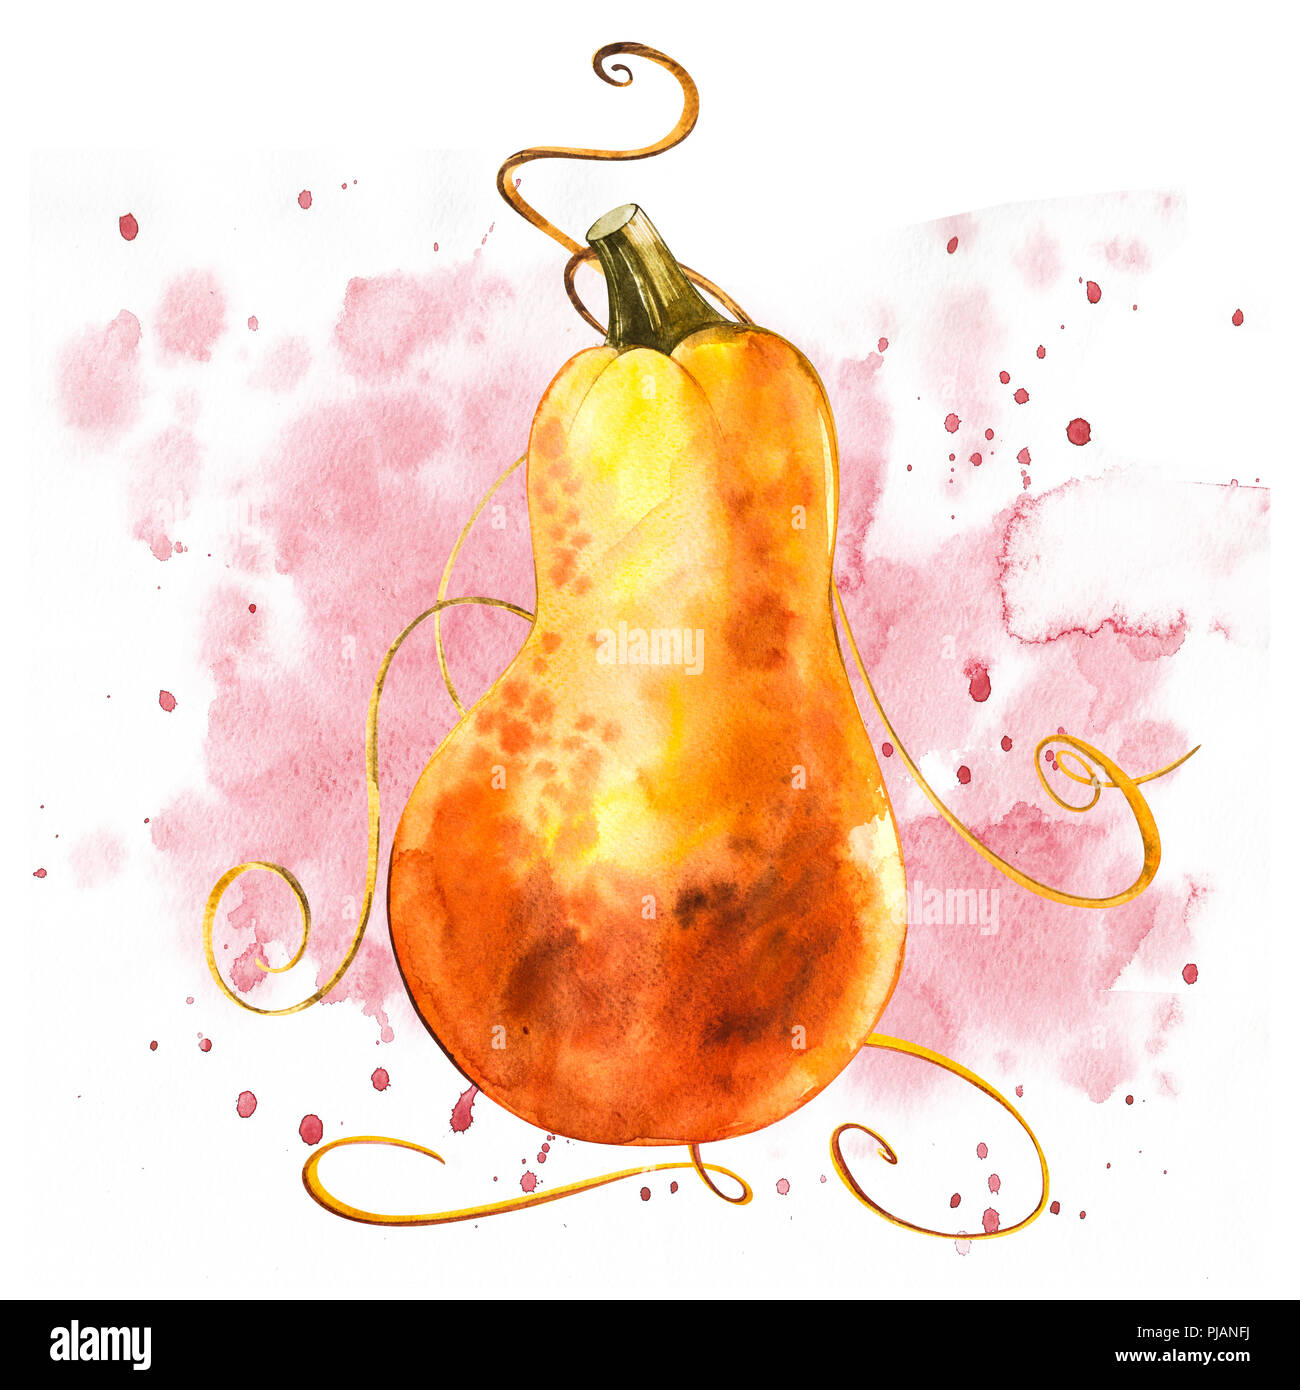 Watercolor hand drawn illustration of pumpkin with paint splashes. Orange food. Art fresh watercolor orange pumpkins isolated on the white background. Stock Photo